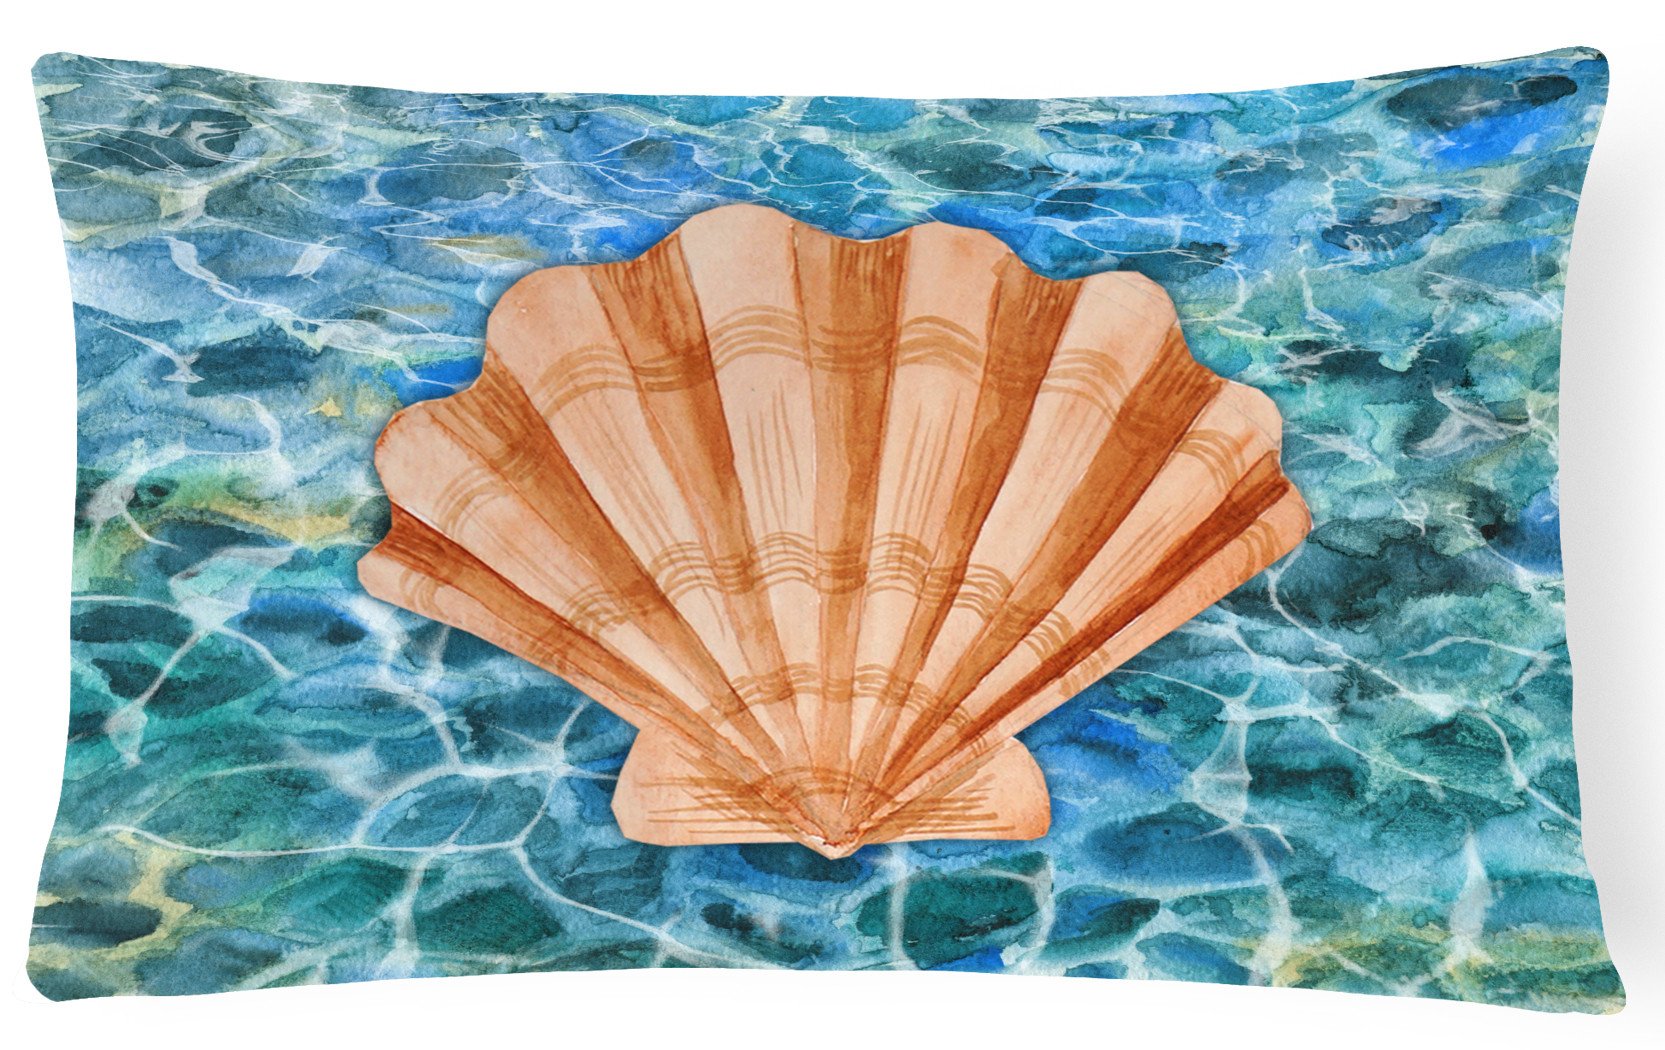 Scallop Shell and Water Canvas Fabric Decorative Pillow BB5367PW1216 by Caroline's Treasures